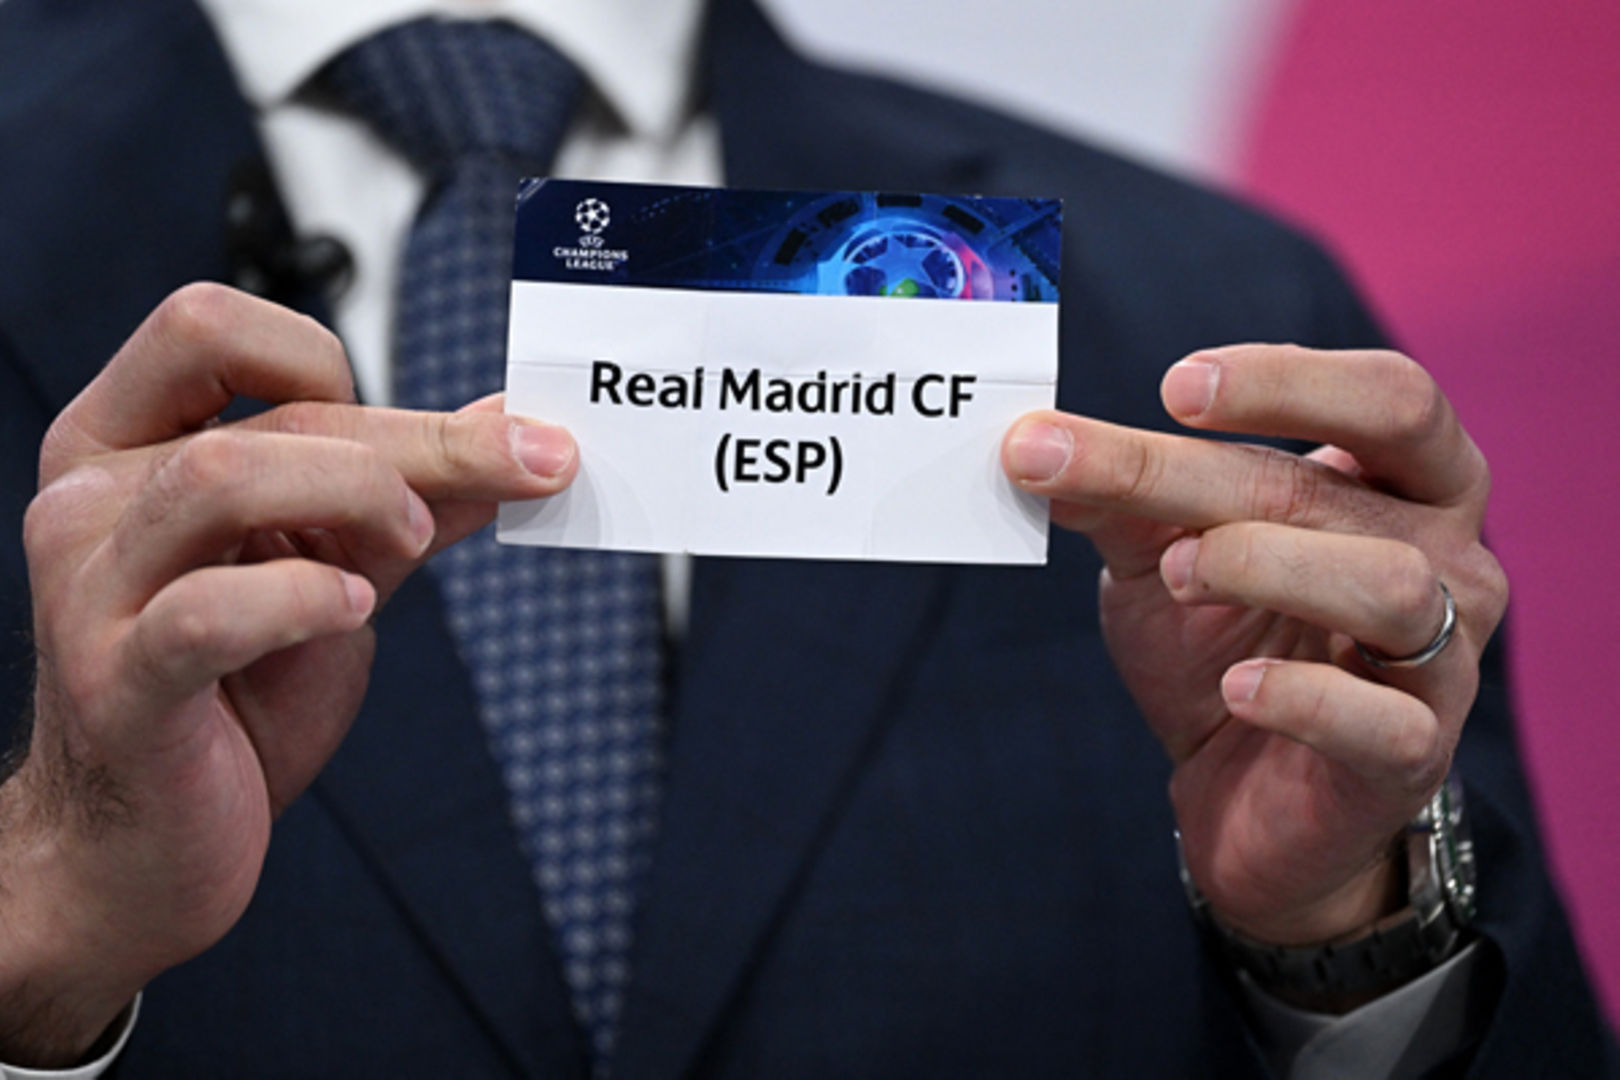 Champions League: Chelsea draw Real Madrid, Manchester City land Bayern, Champions  League